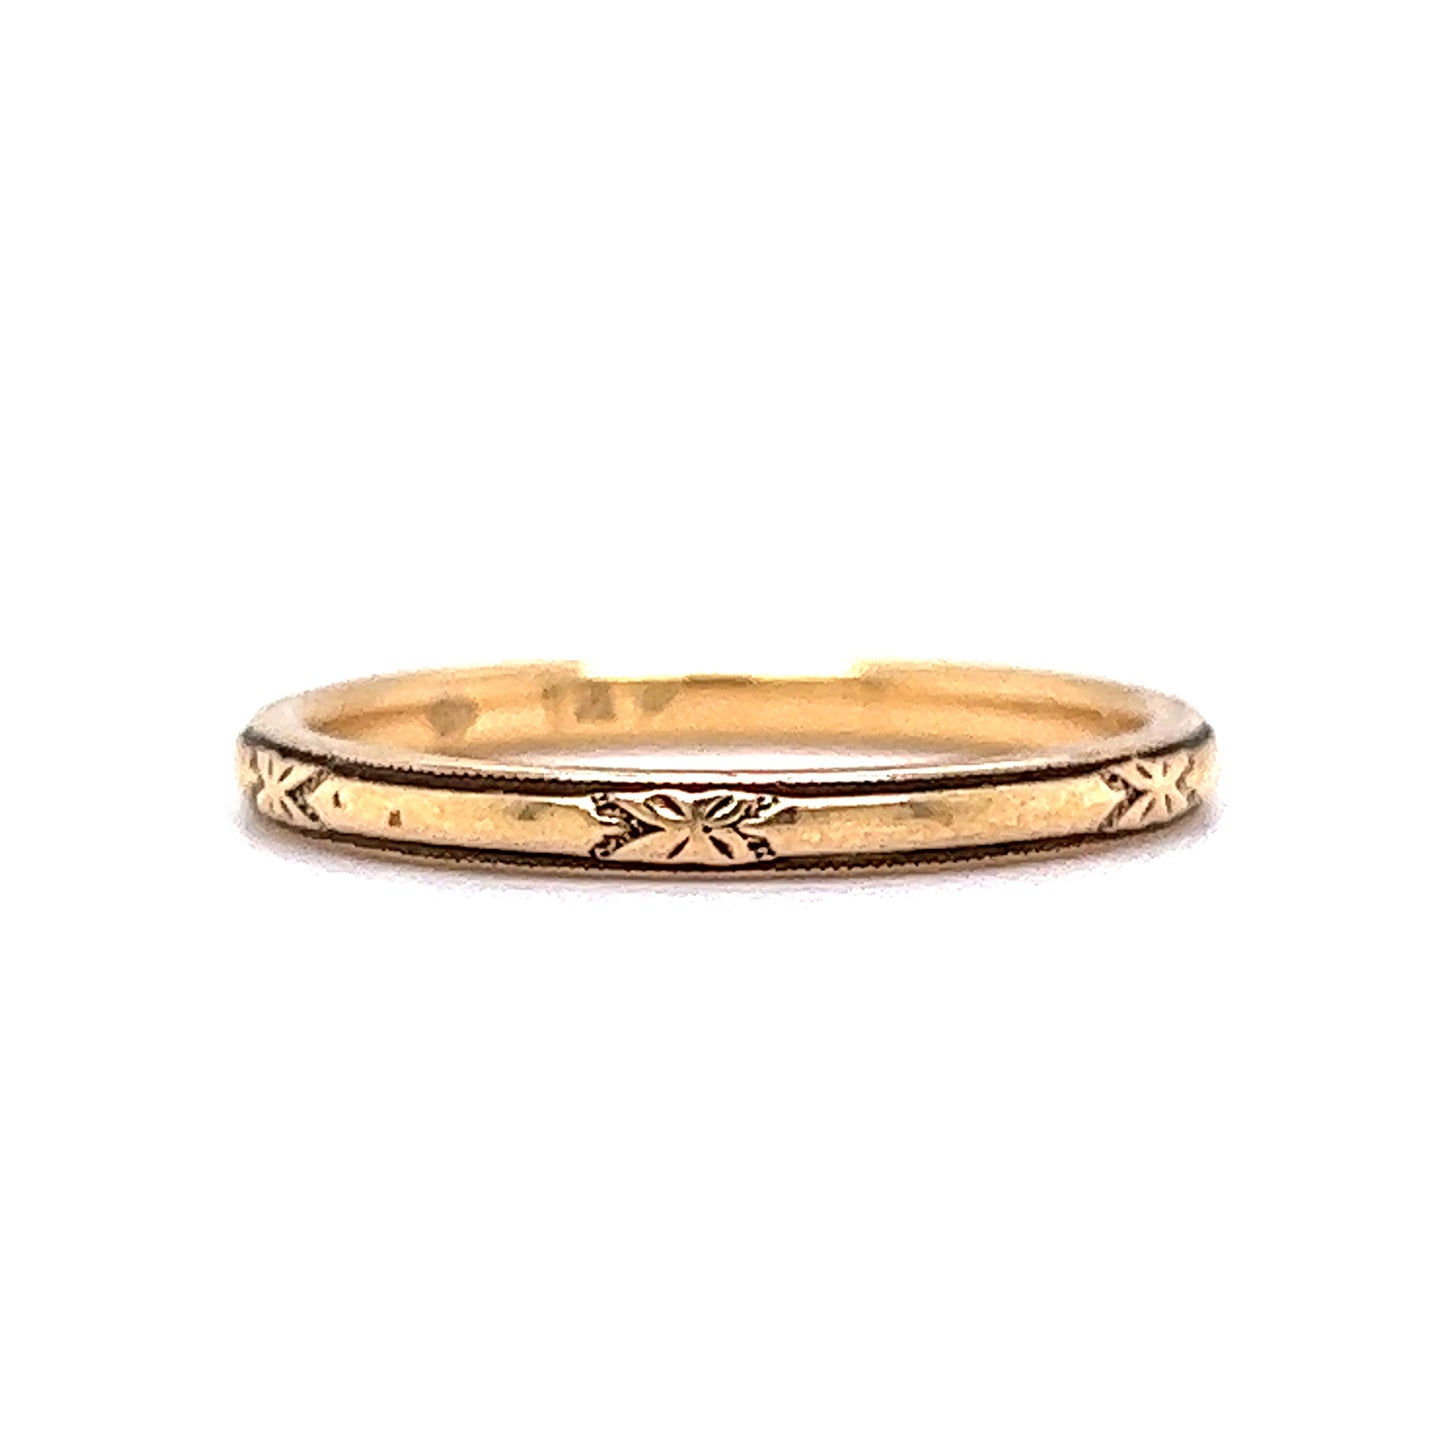 Men's Art Deco Thin Engraved Wedding Band in 14k Yellow Gold